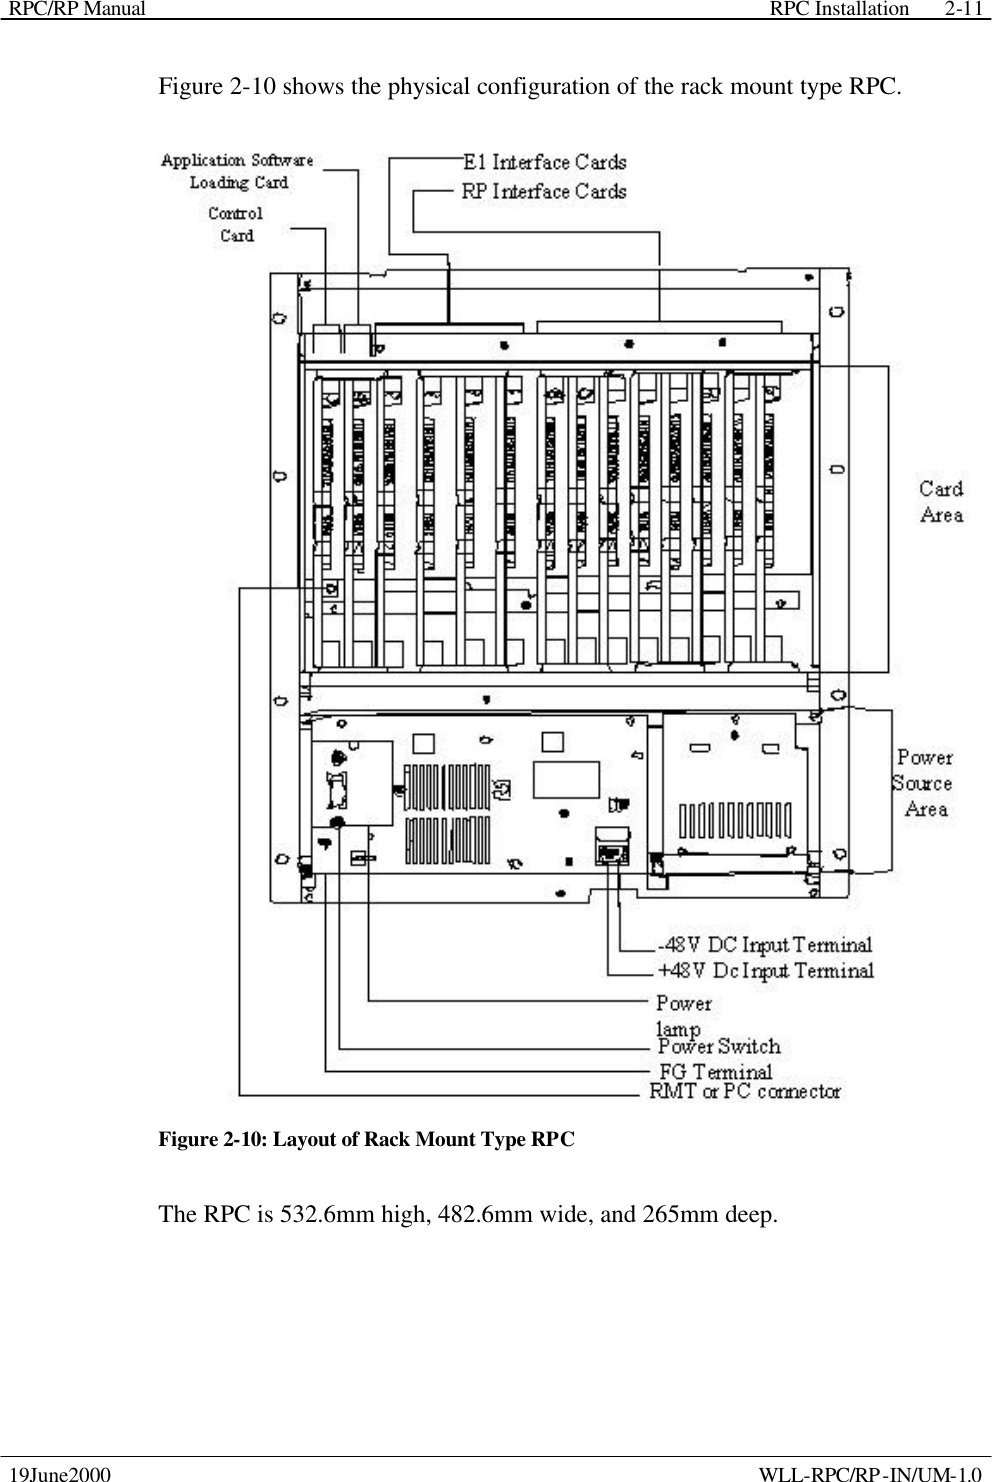 RPC/RP Manual    RPC Installation  19June2000    WLL-RPC/RP-IN/UM-1.0 2-11Figure 2-10 shows the physical configuration of the rack mount type RPC.  Figure 2-10: Layout of Rack Mount Type RPC The RPC is 532.6mm high, 482.6mm wide, and 265mm deep. 